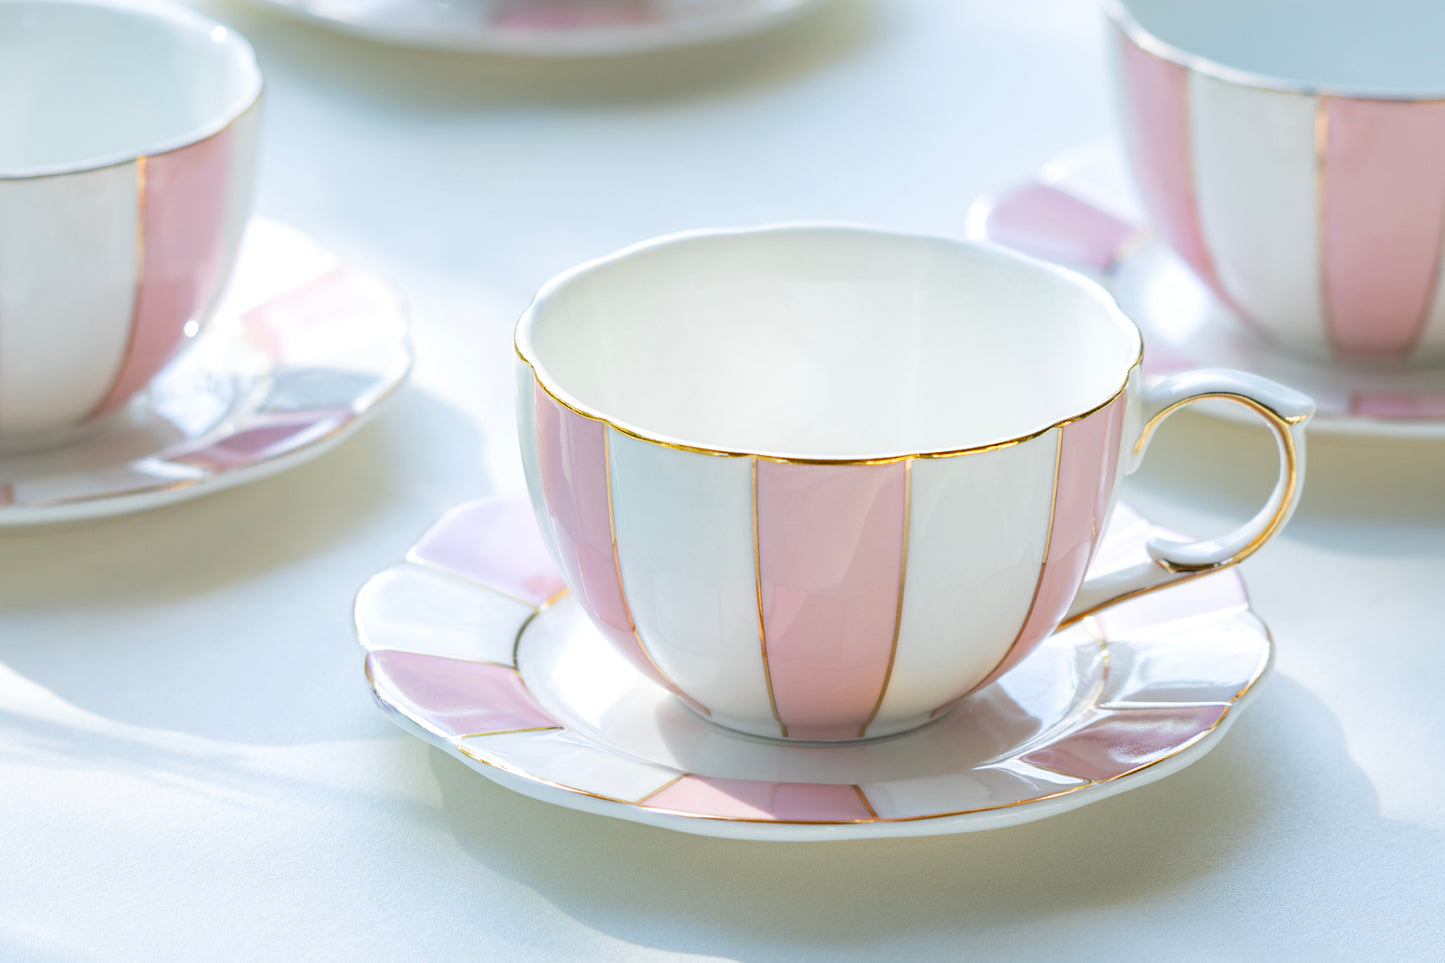 Grace Teaware Pink and White Scallop Fine Porcelain Tea Cup and Saucer